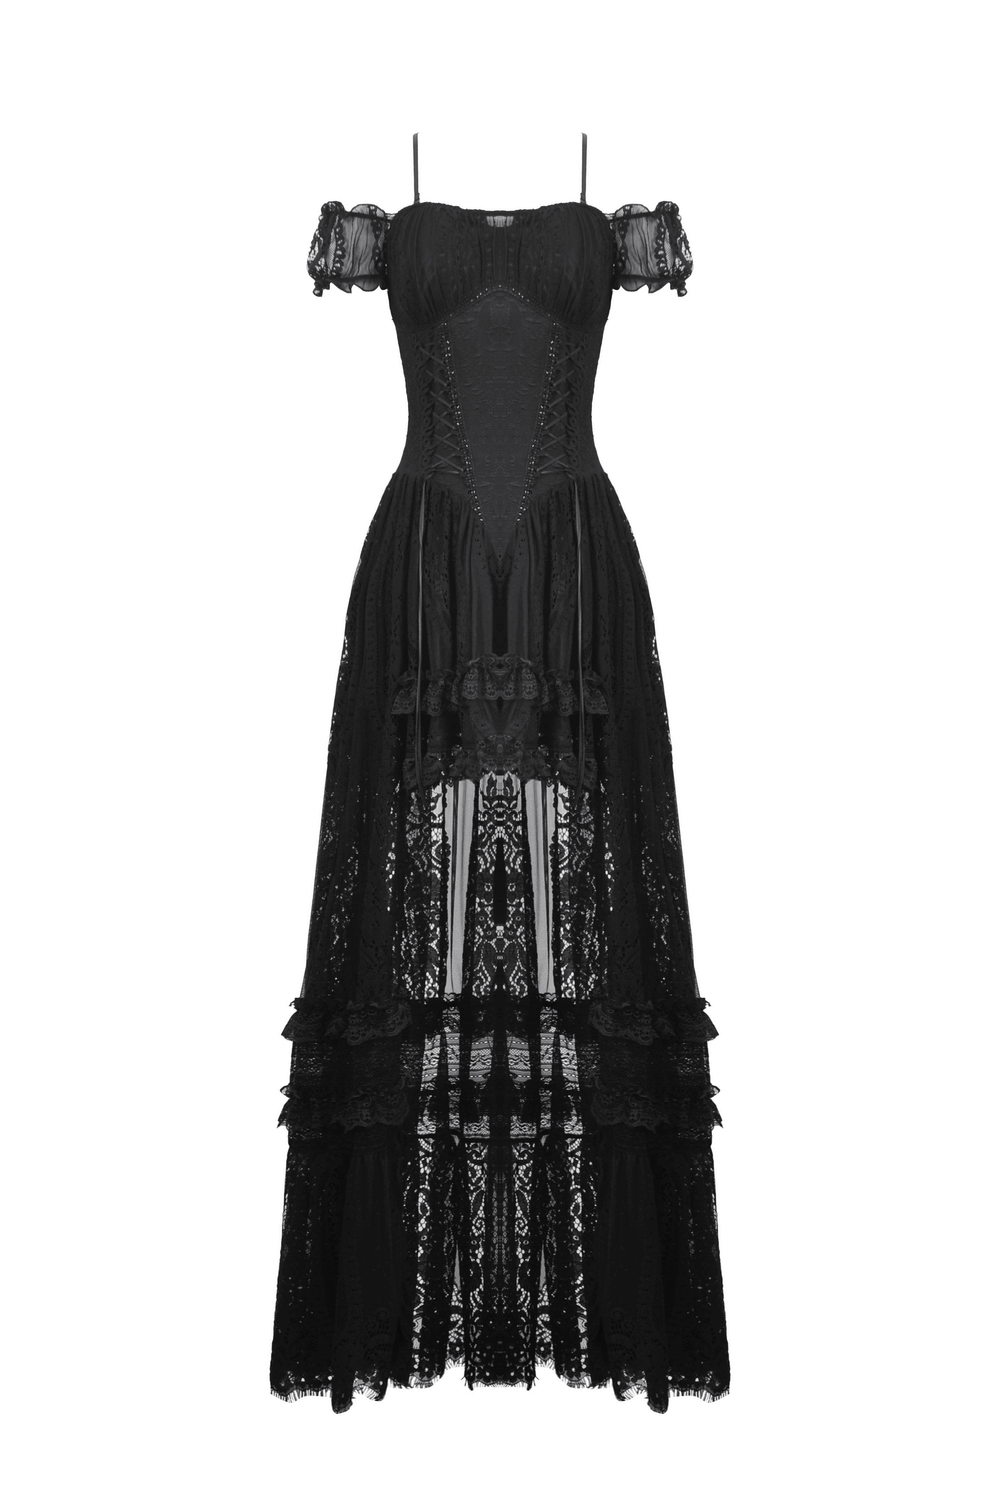 Gothic Off-Shoulder Lace High-Low Dress for Women